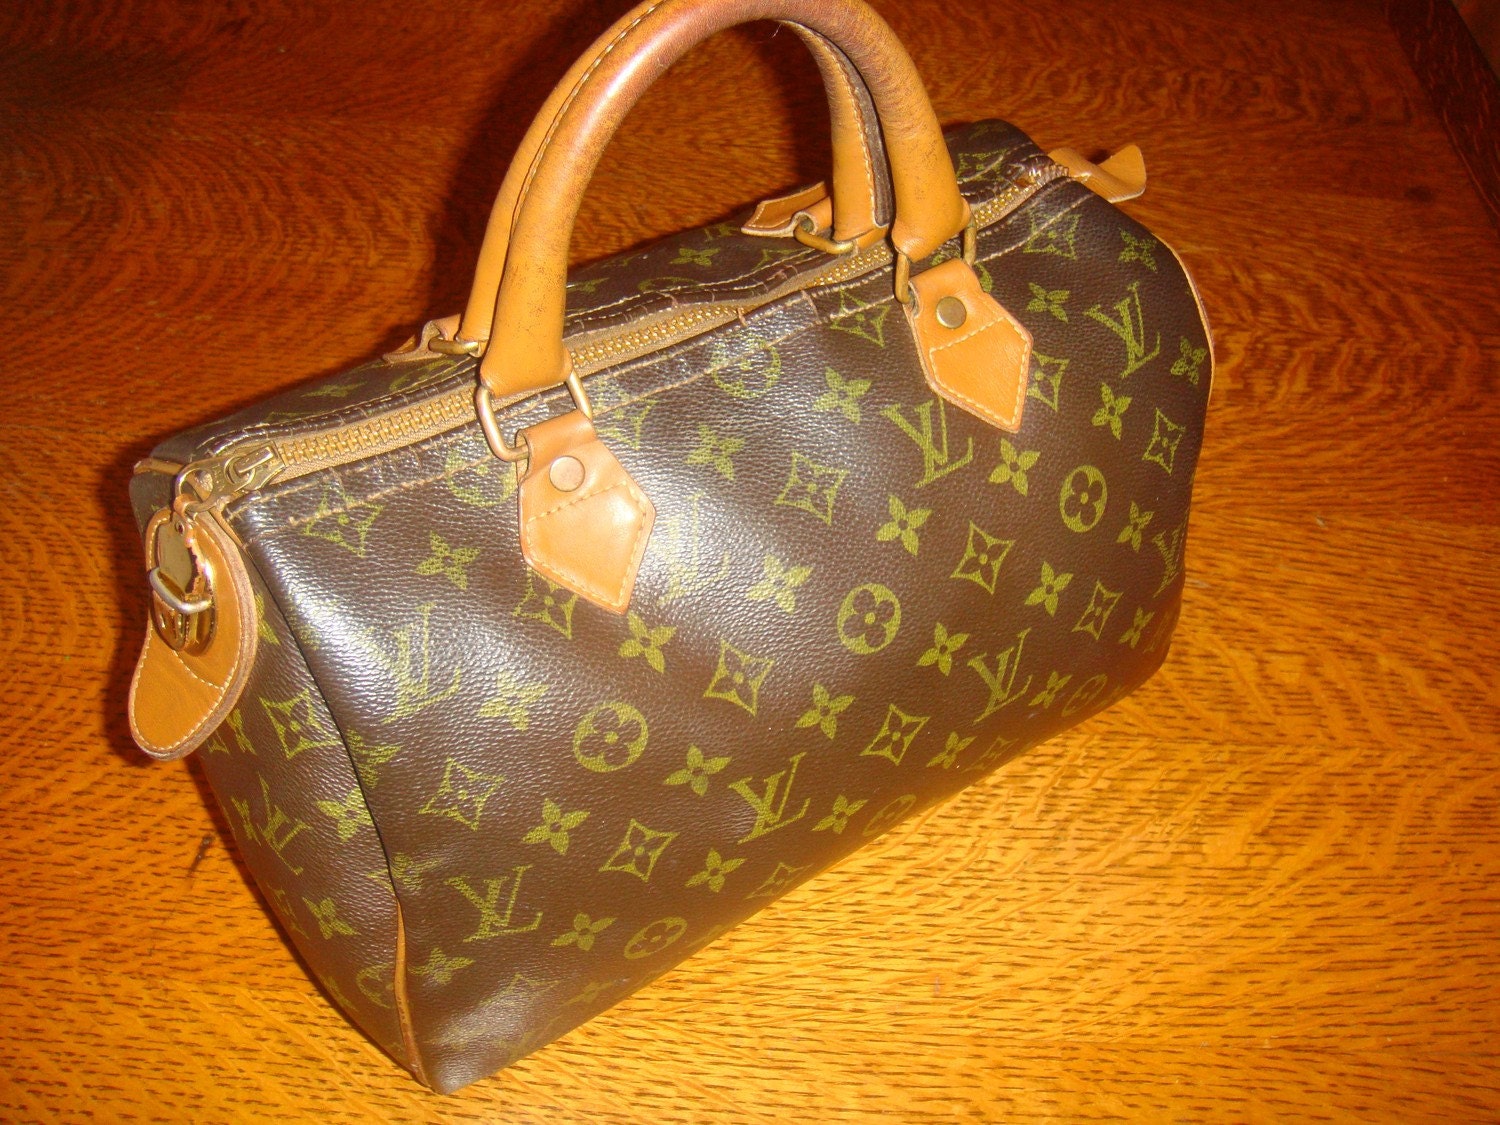 LOUIS VUITTON SPEEDY Bag 30 Authentic Vintage by bagborrowrsteal